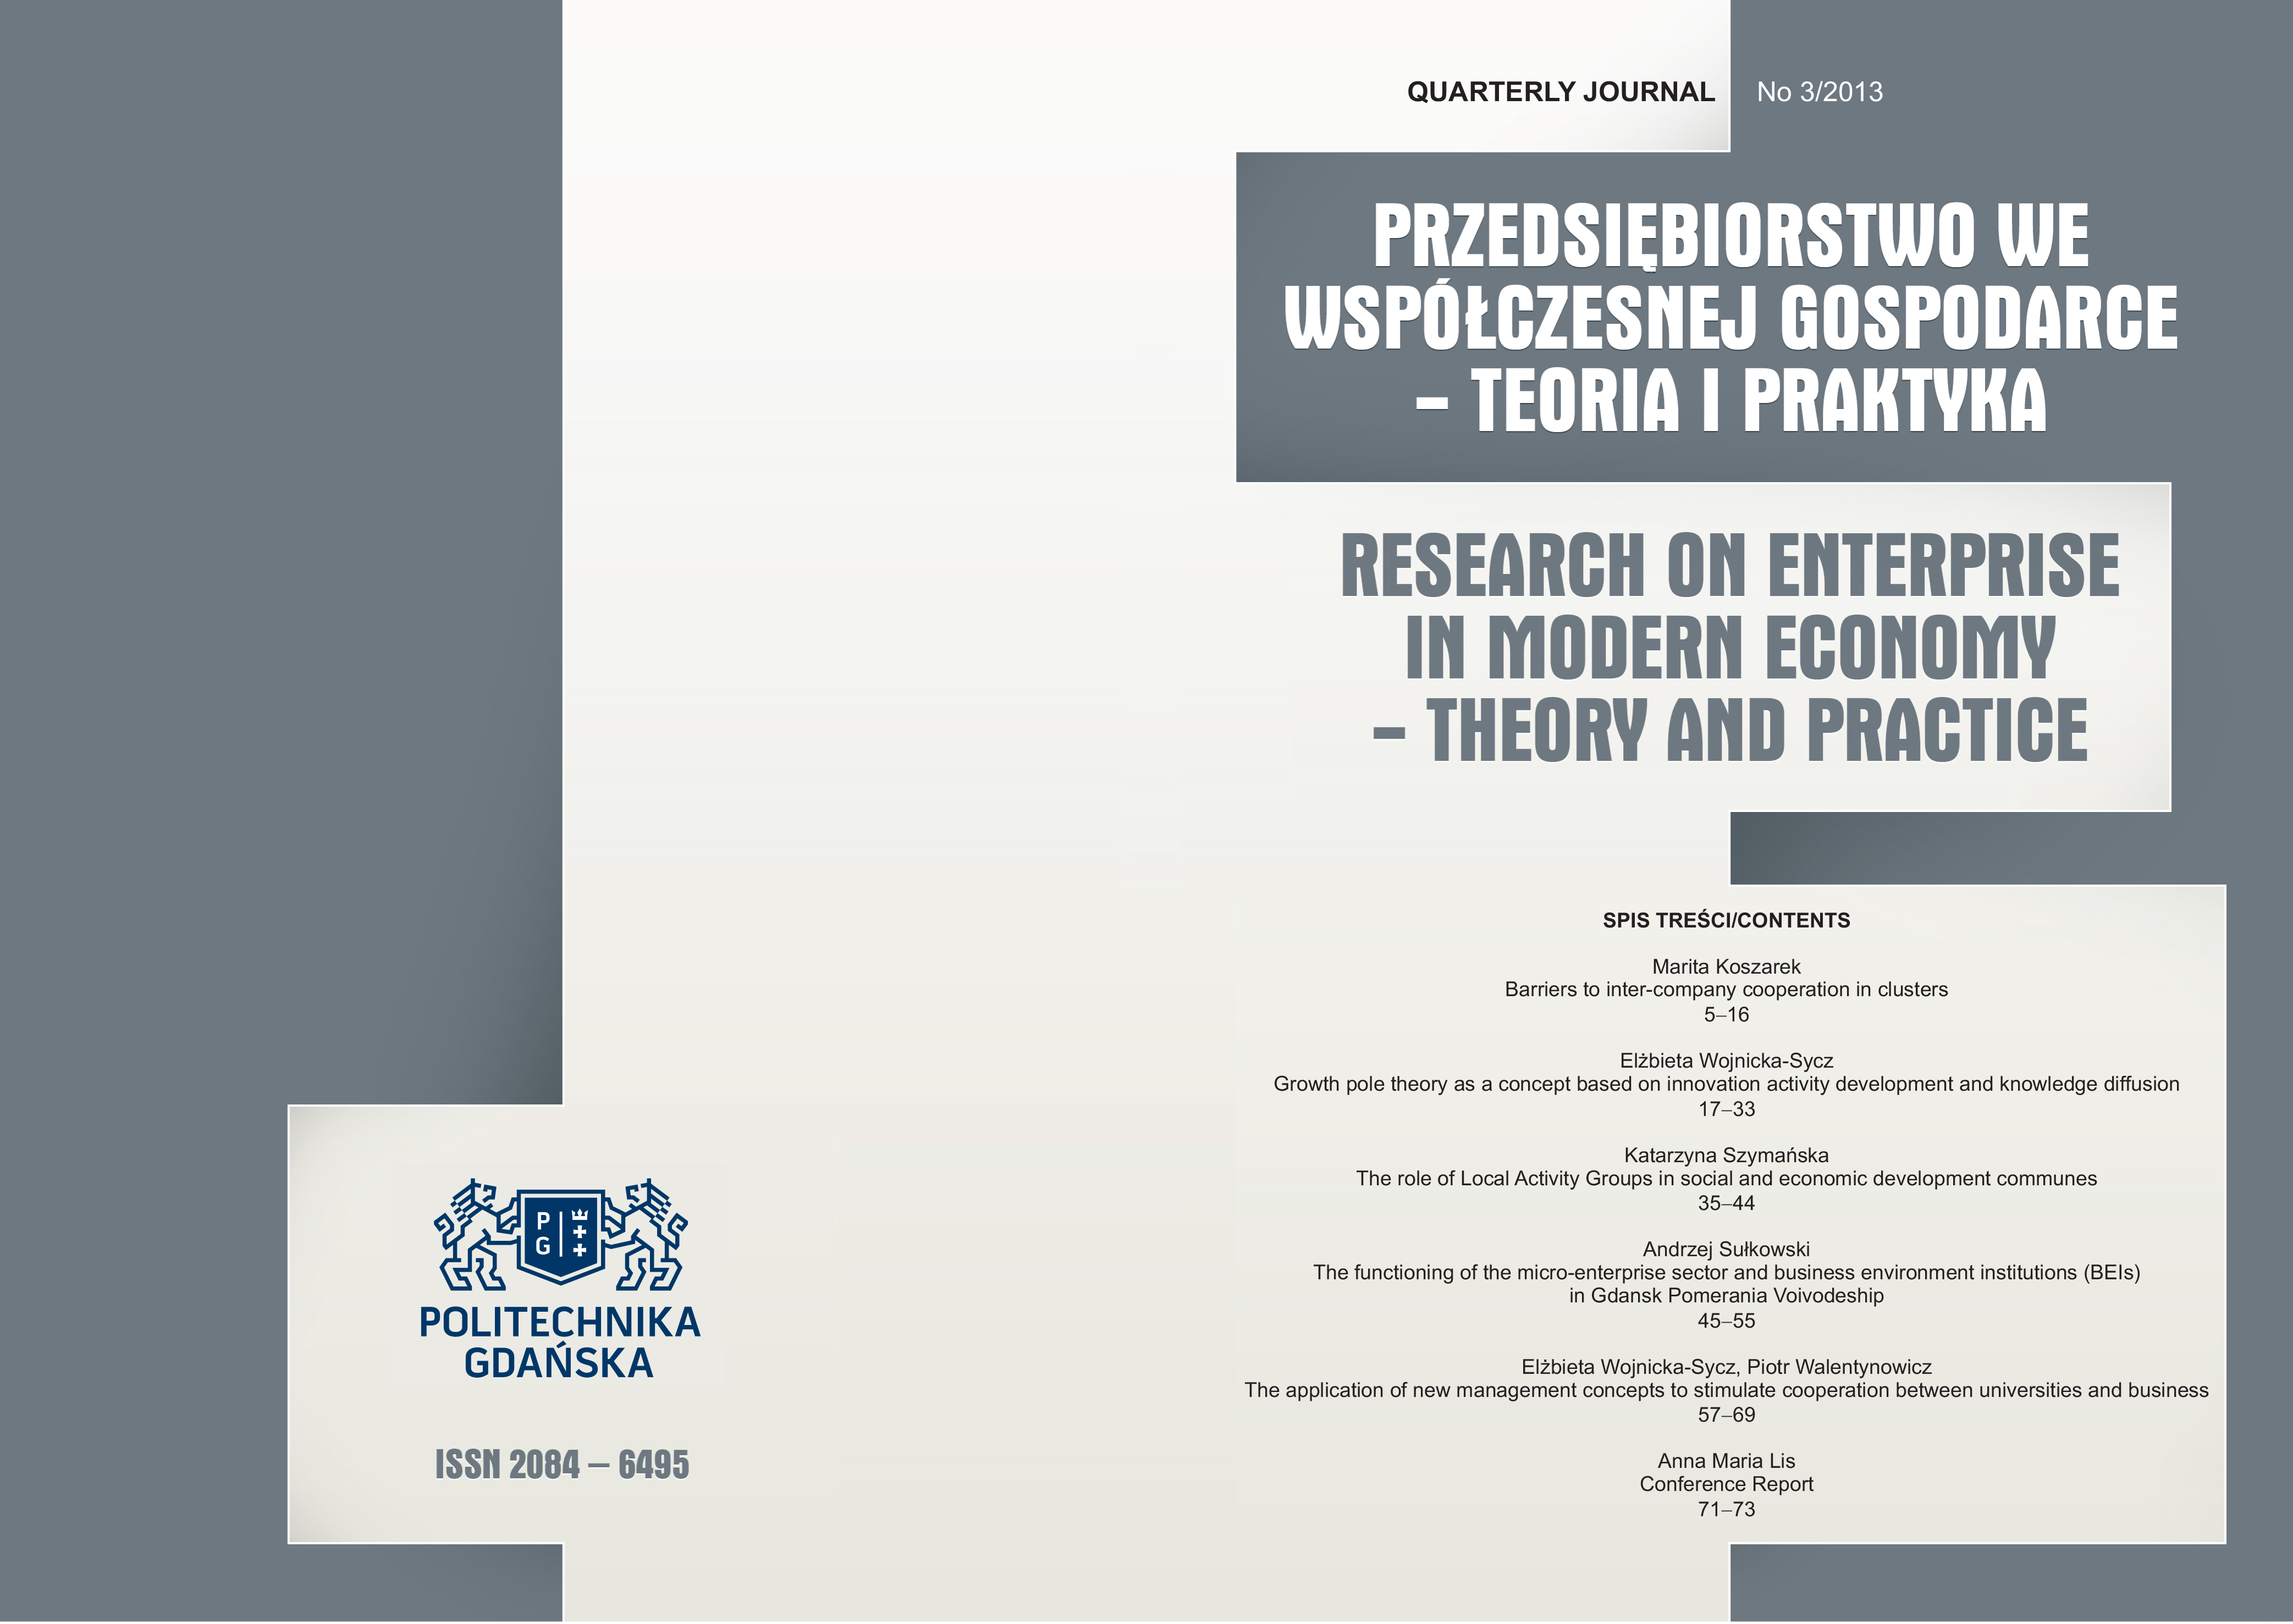 Conference Report Cover Image